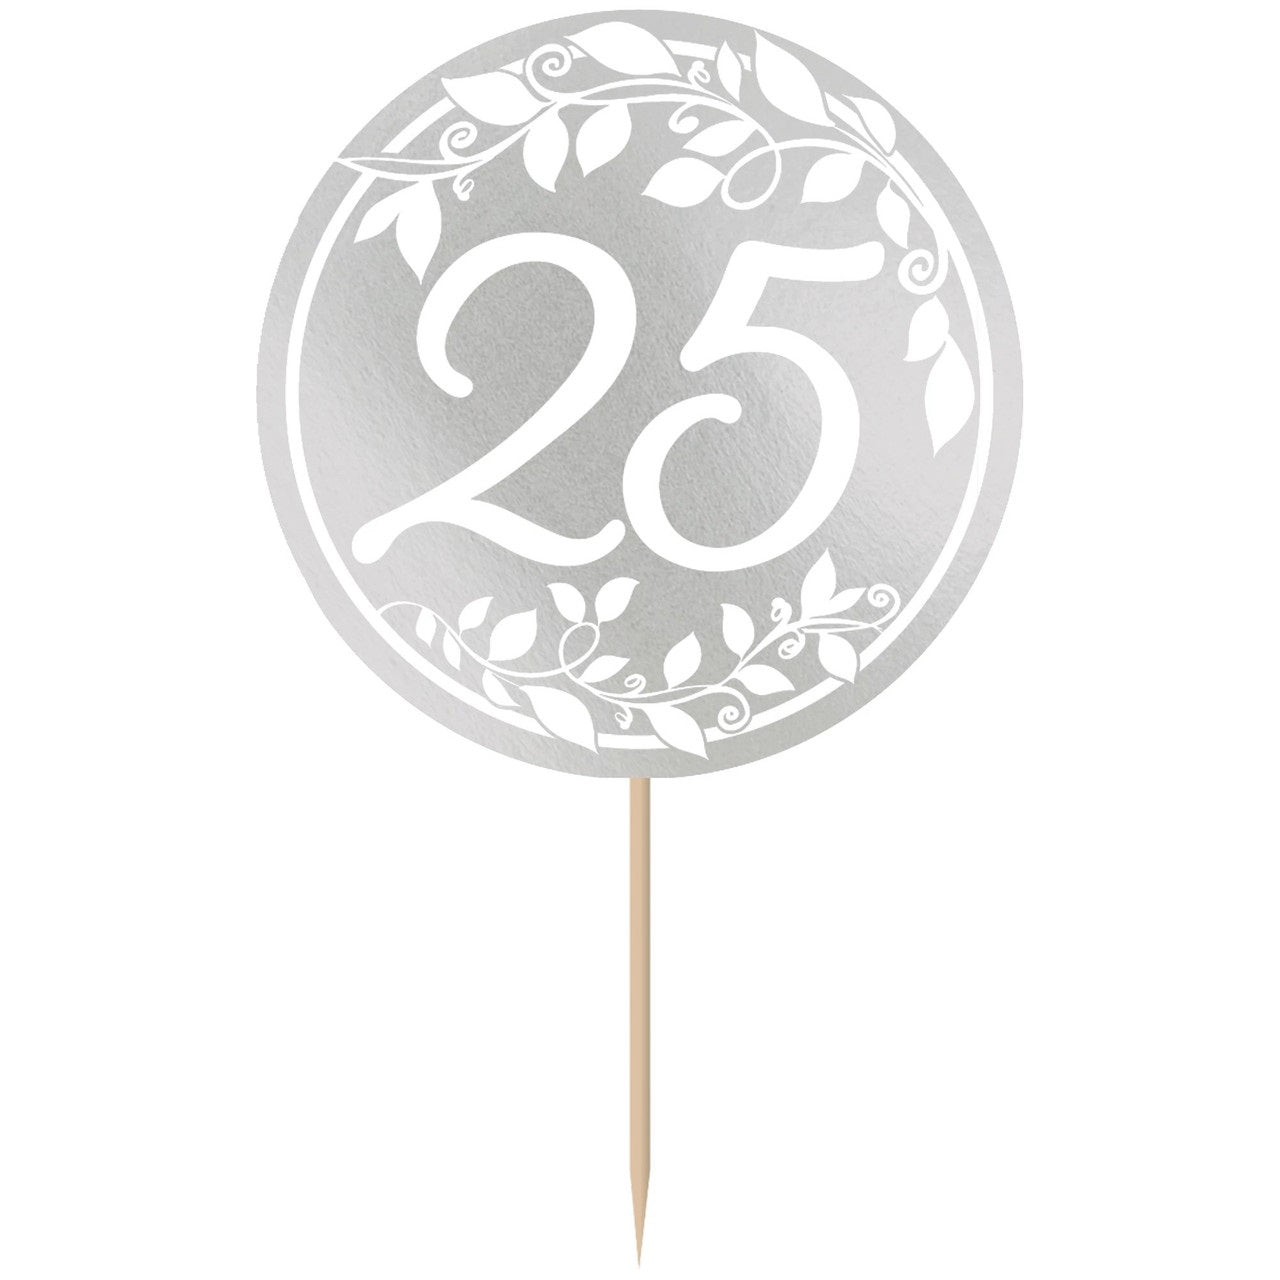 25th Anniversary Hot-Stamped Picks-Silver, 24pcs